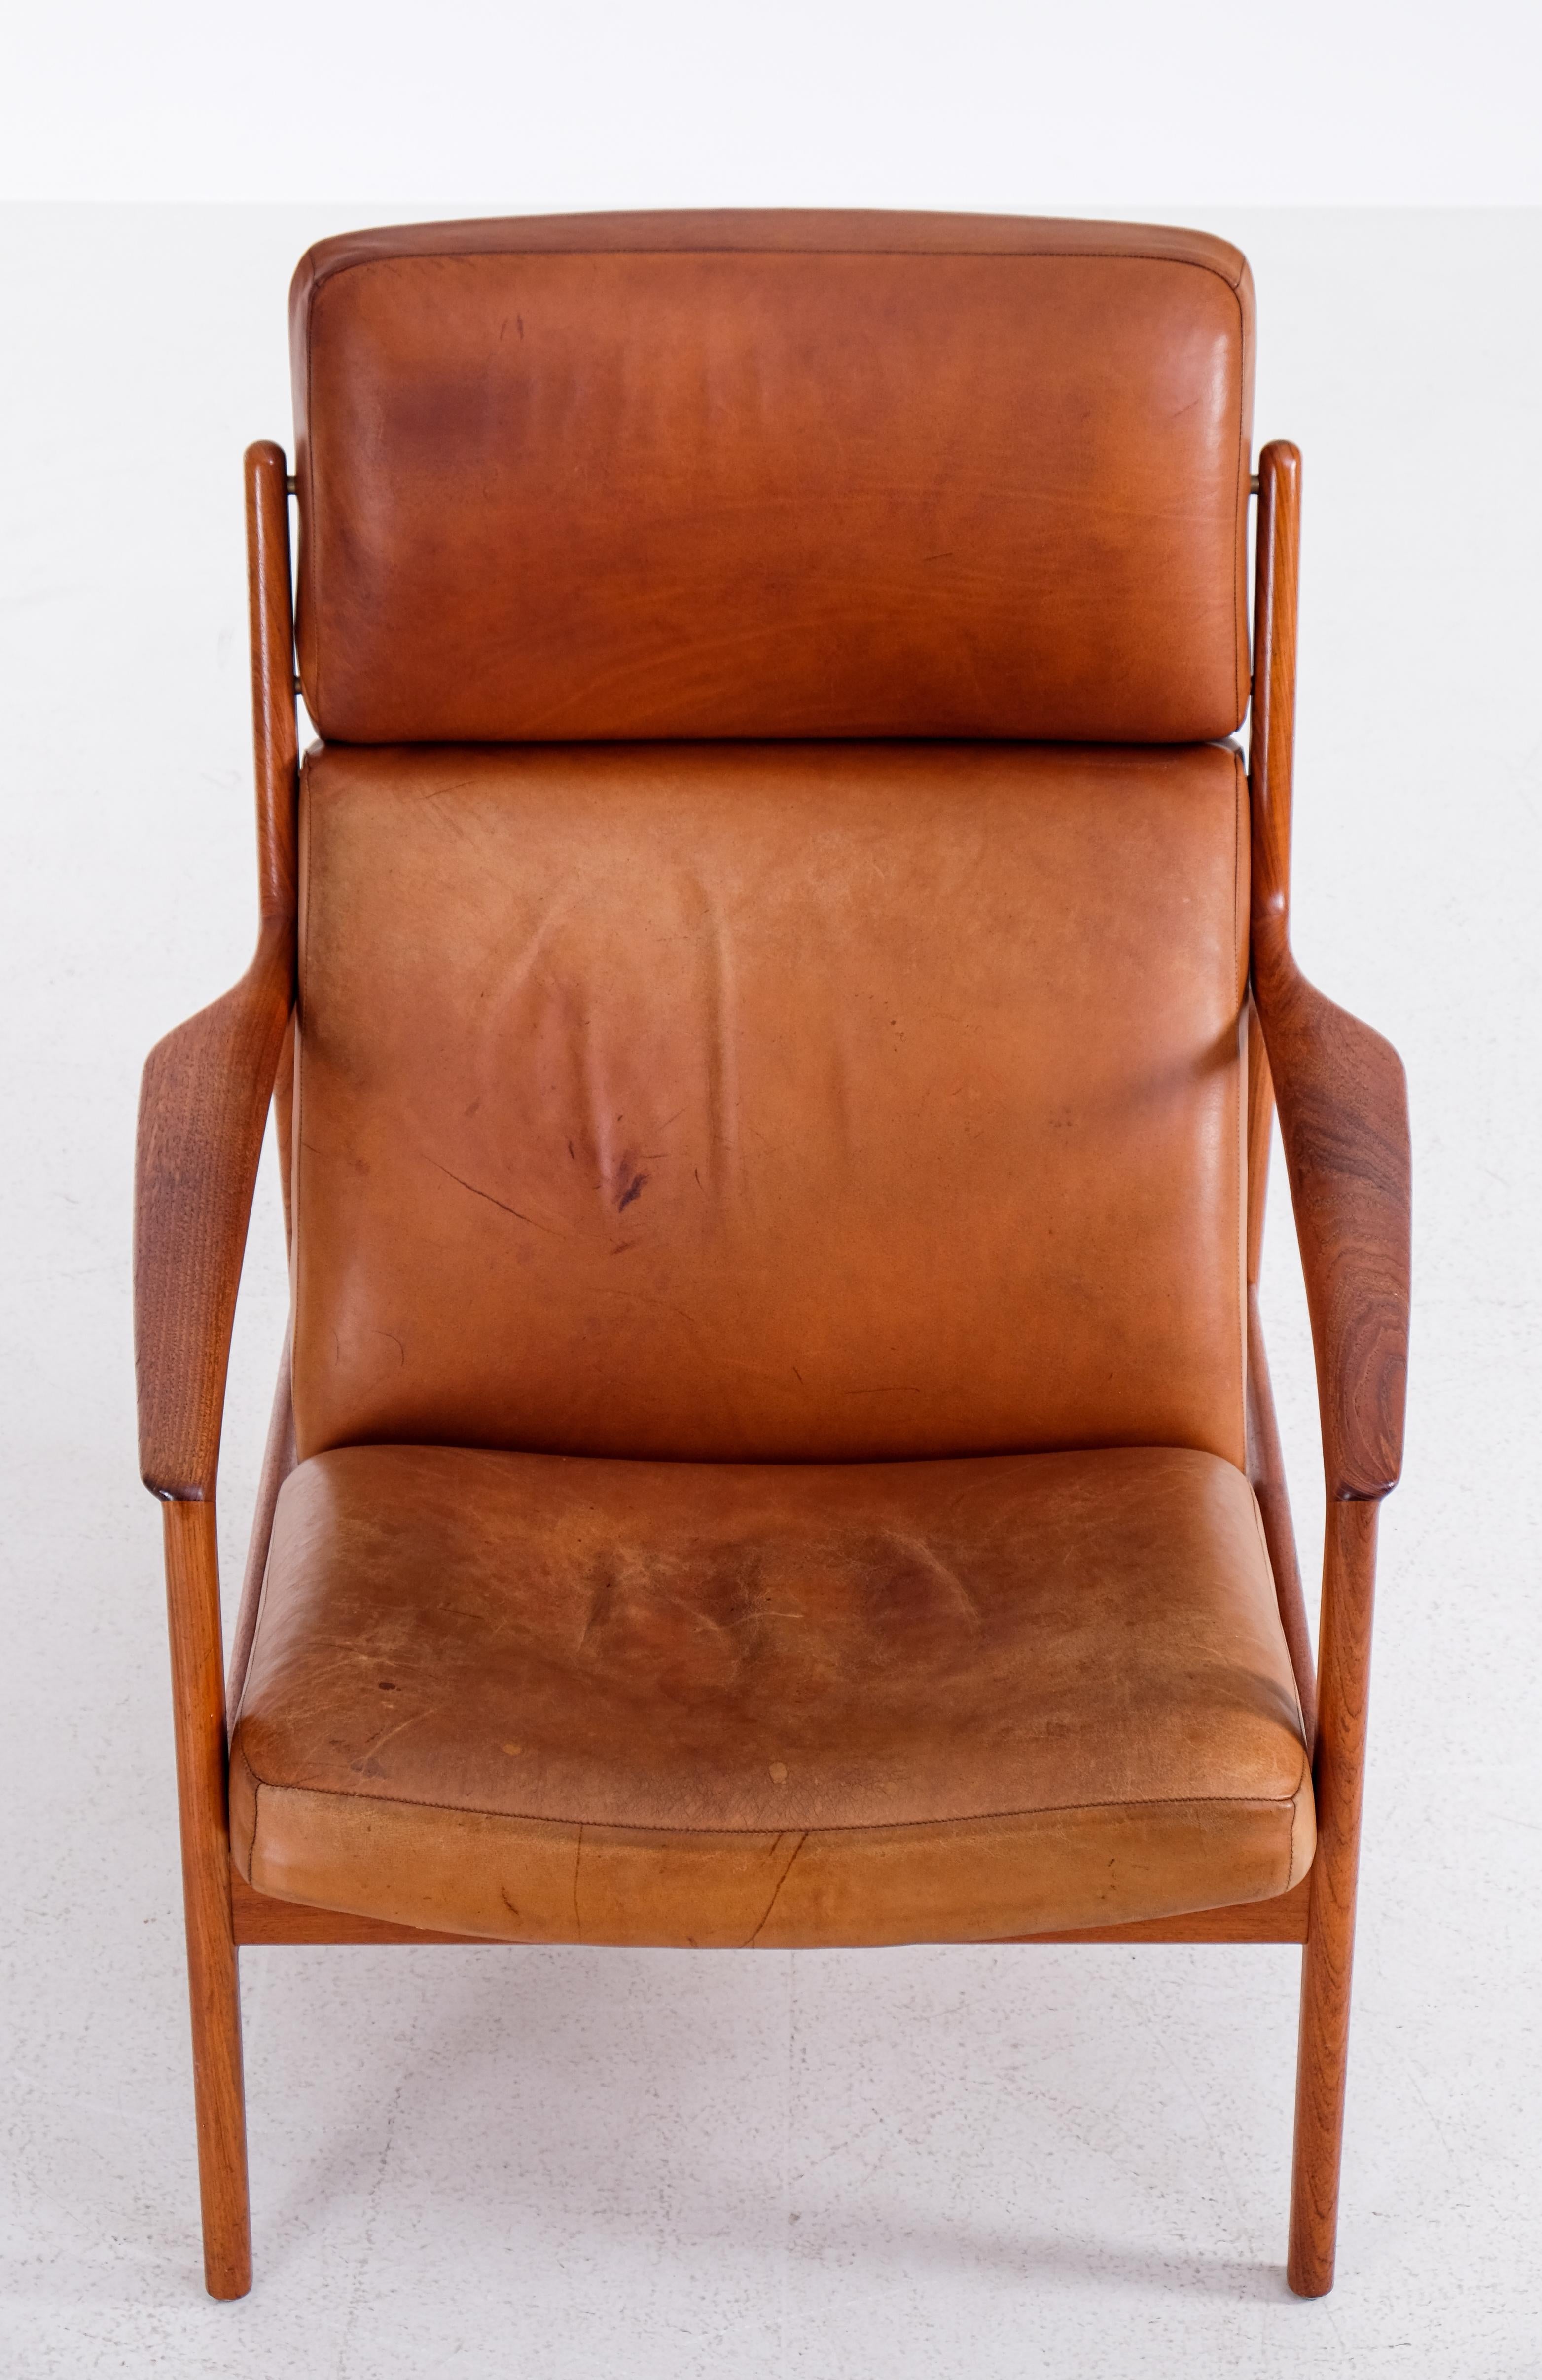 High-back 'USA-75' armchair by Folke Ohlsson for DUX, 1960s For Sale 1